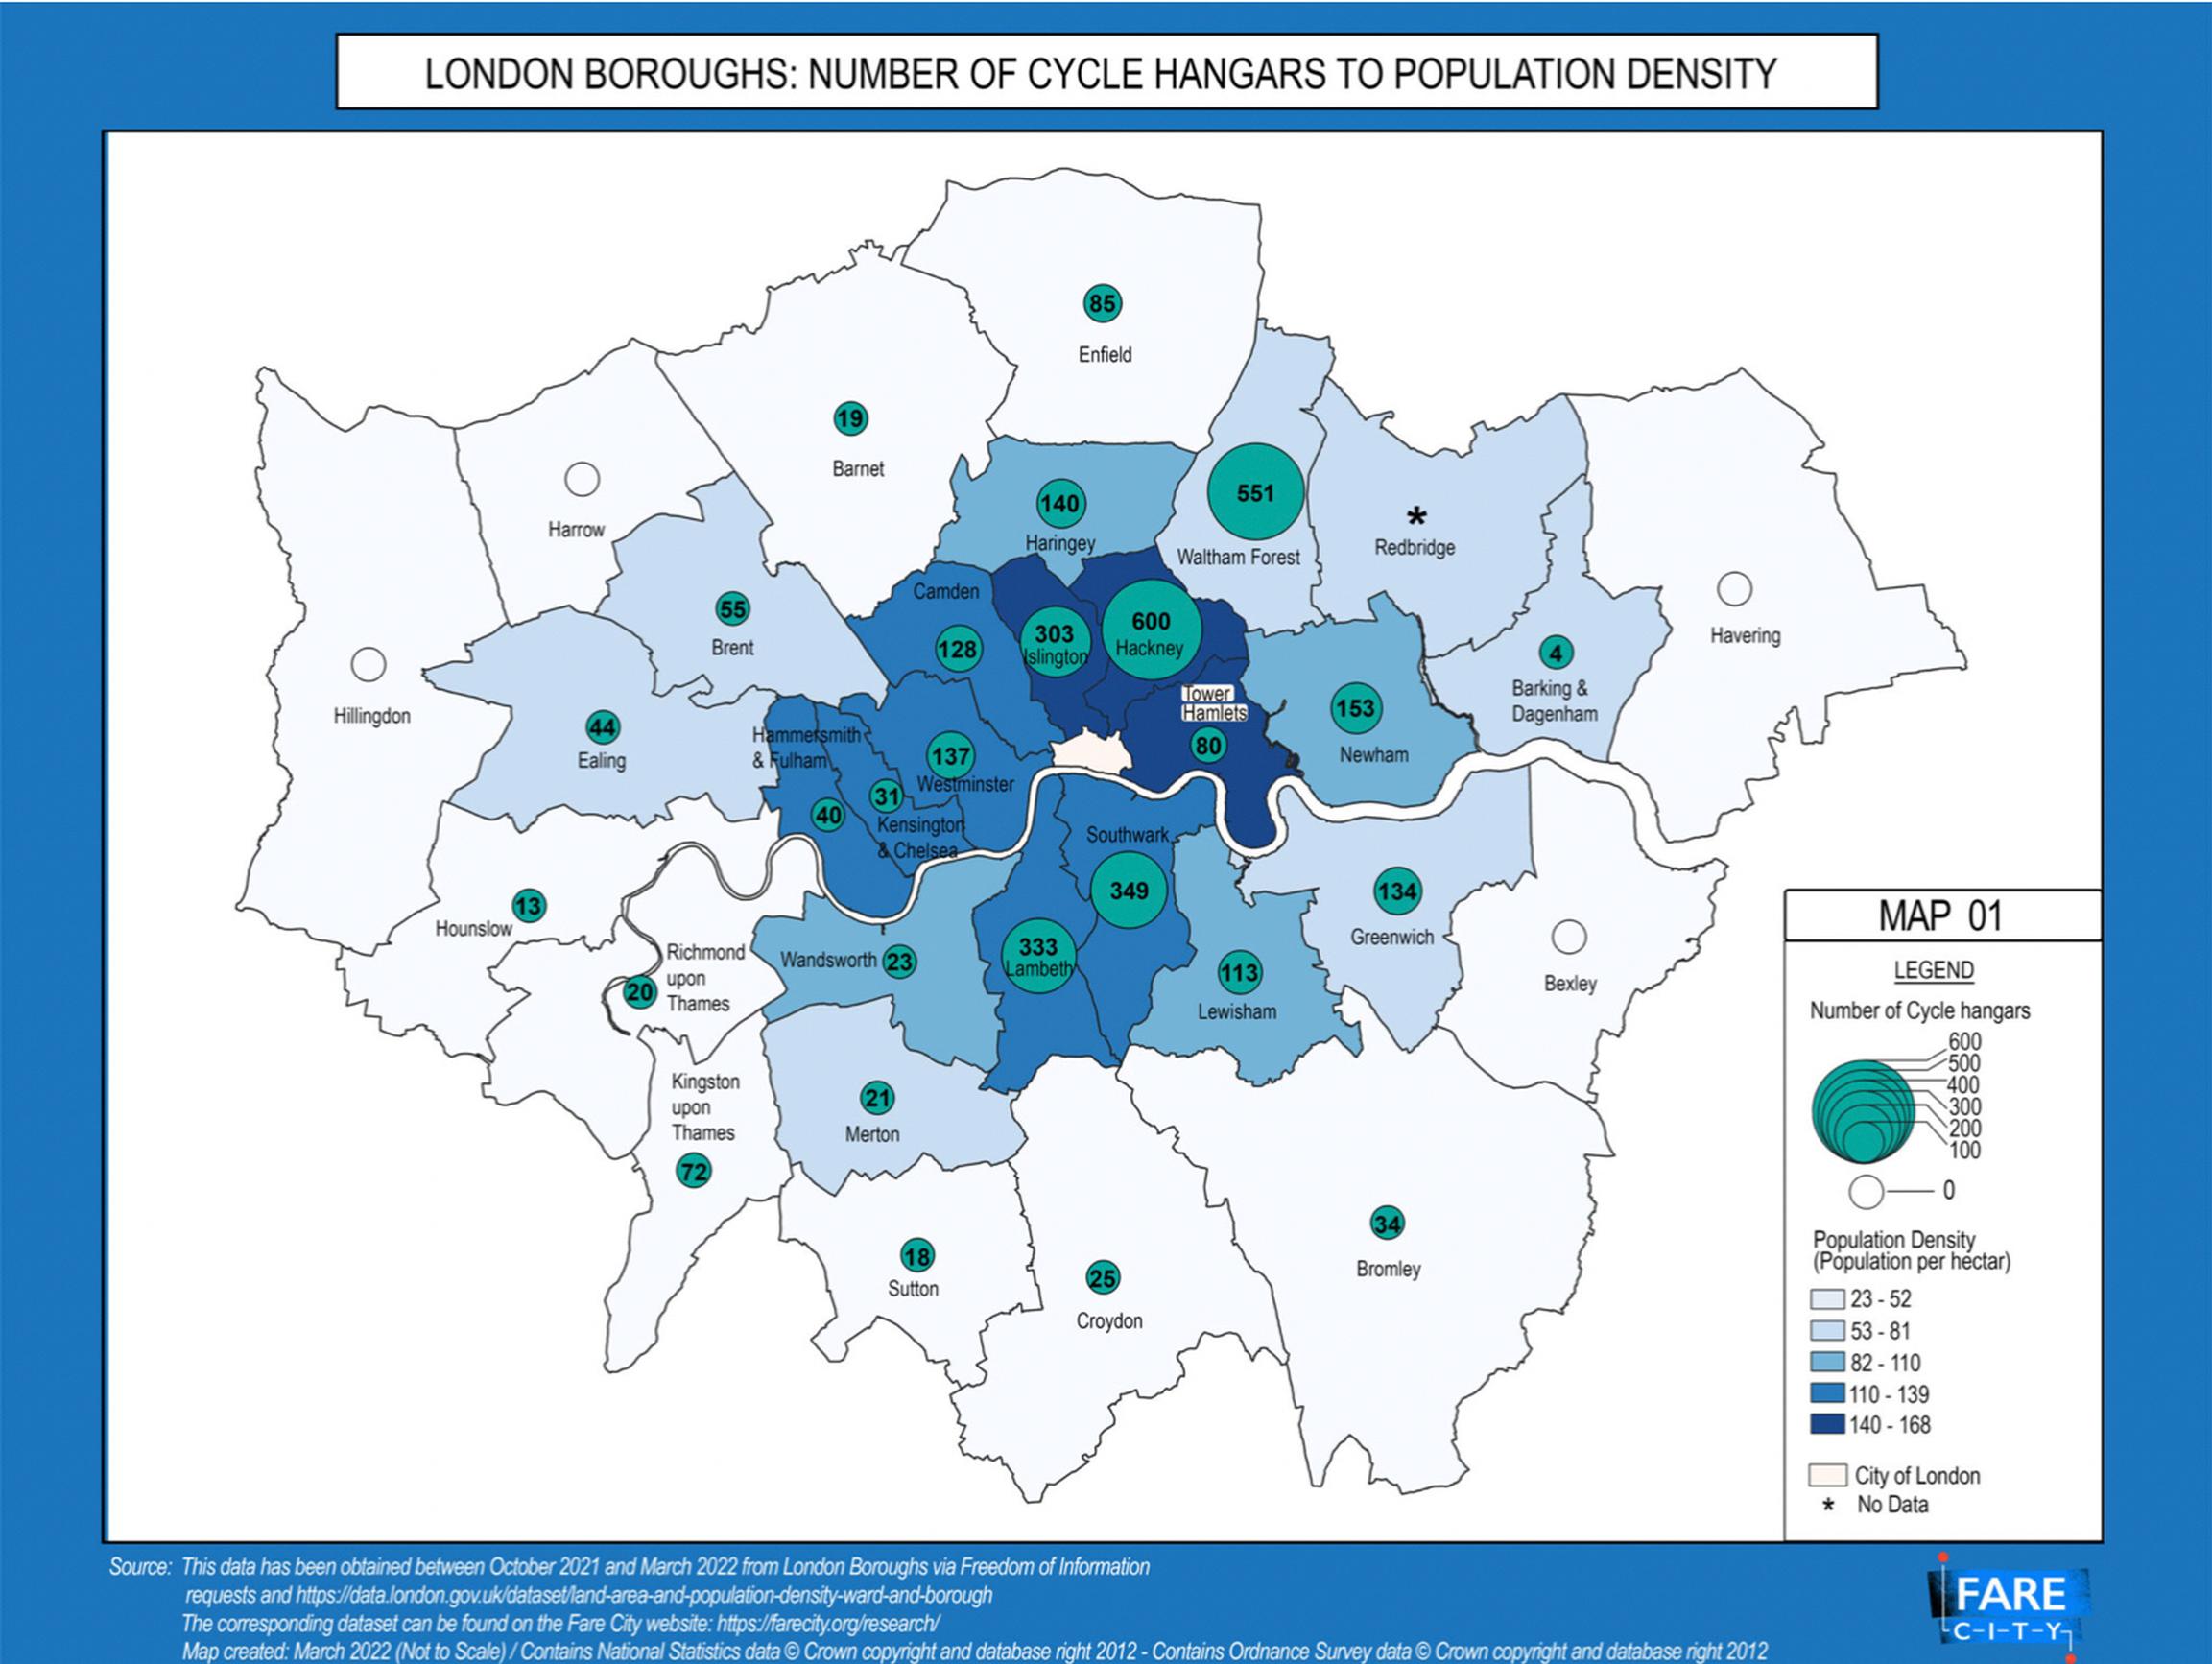 Fare City`s data analysis revealed big contrasts in the implementation of cycle hangars across the capital